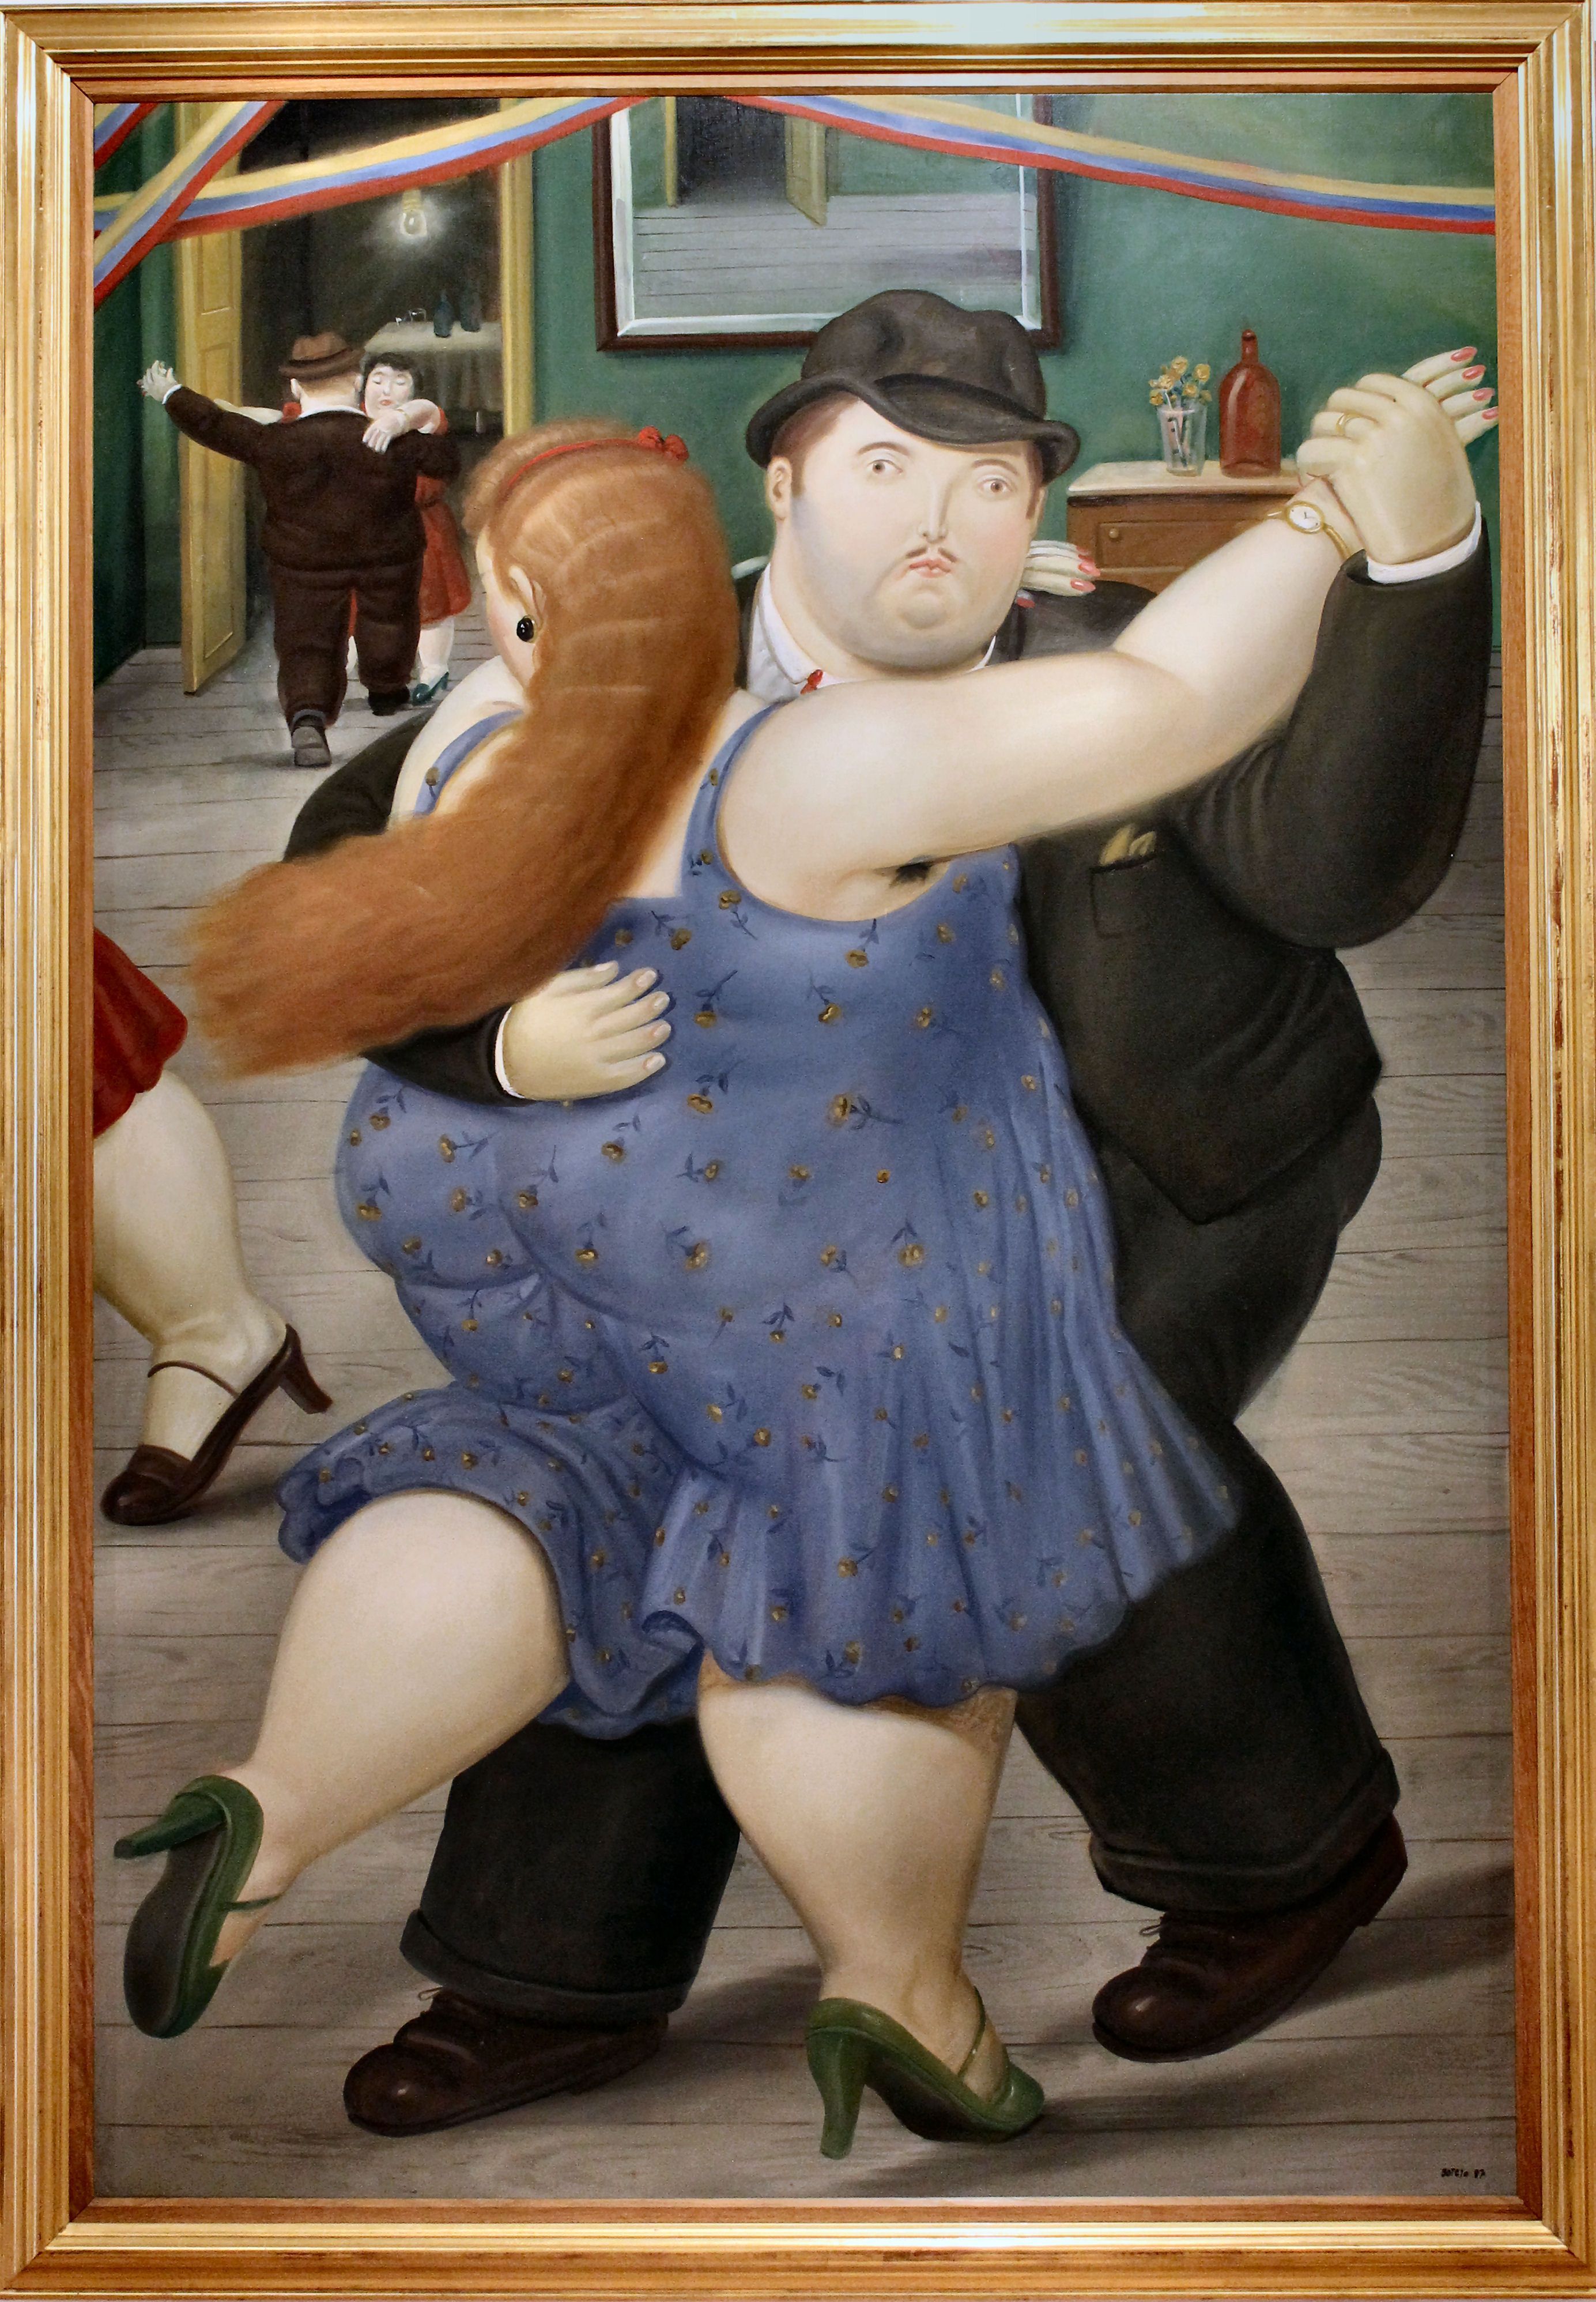 The Dancers by Botero. Fernando botero, Painting wallpaper